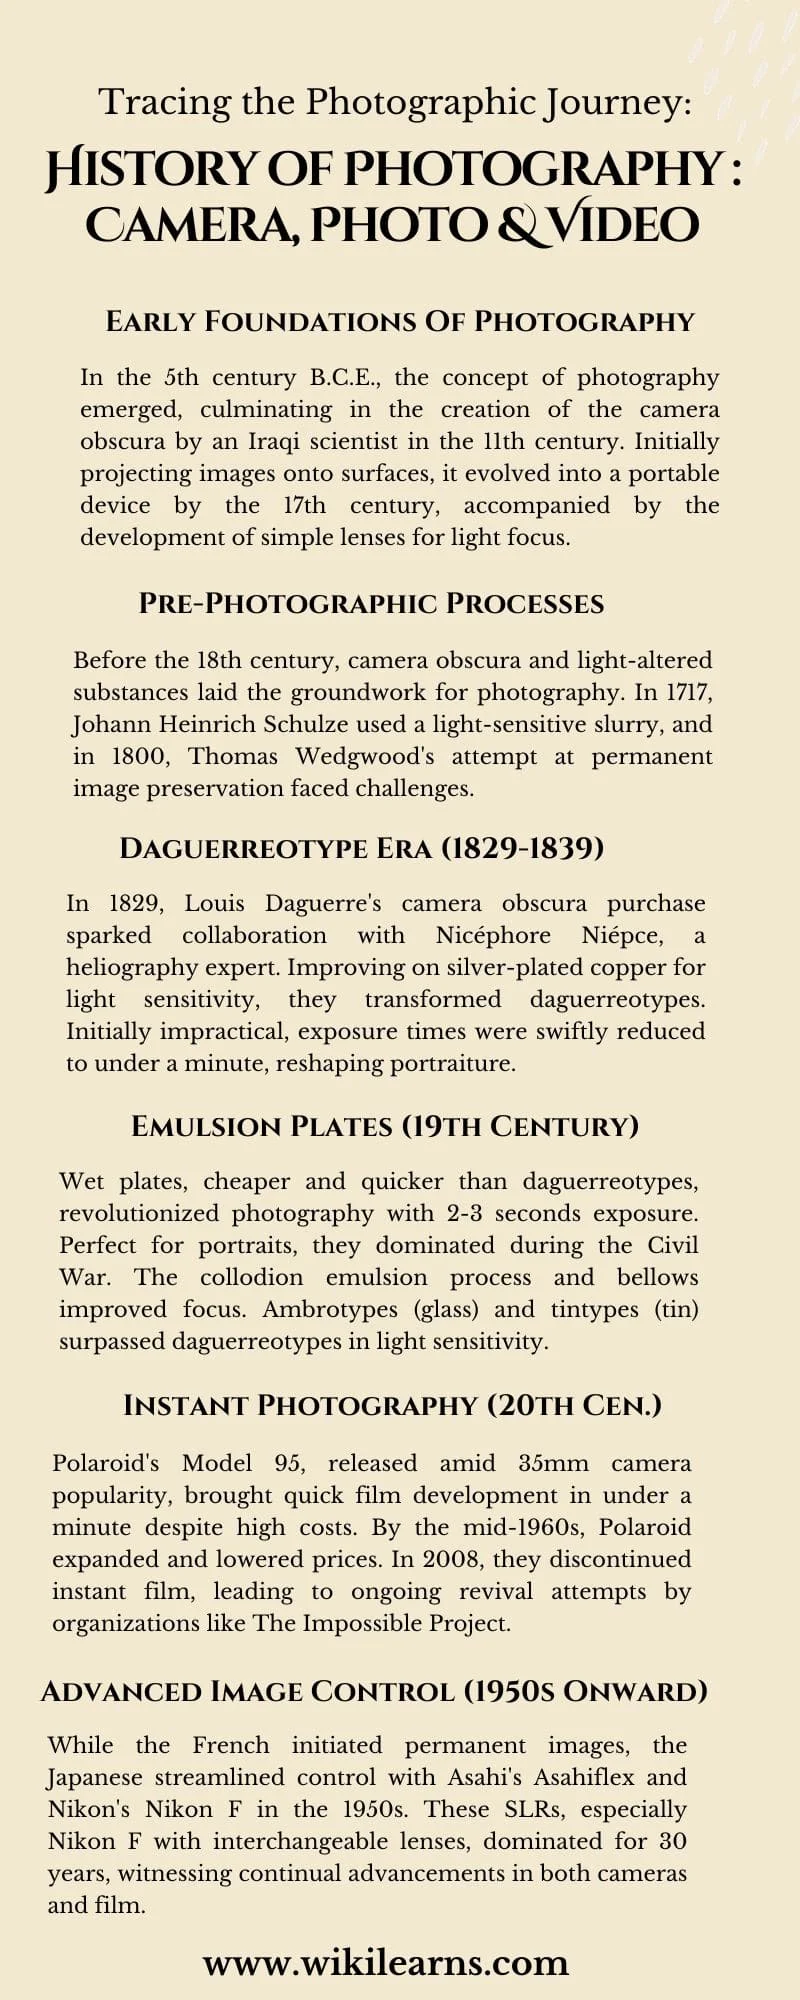 History of Photography, Wikilearns